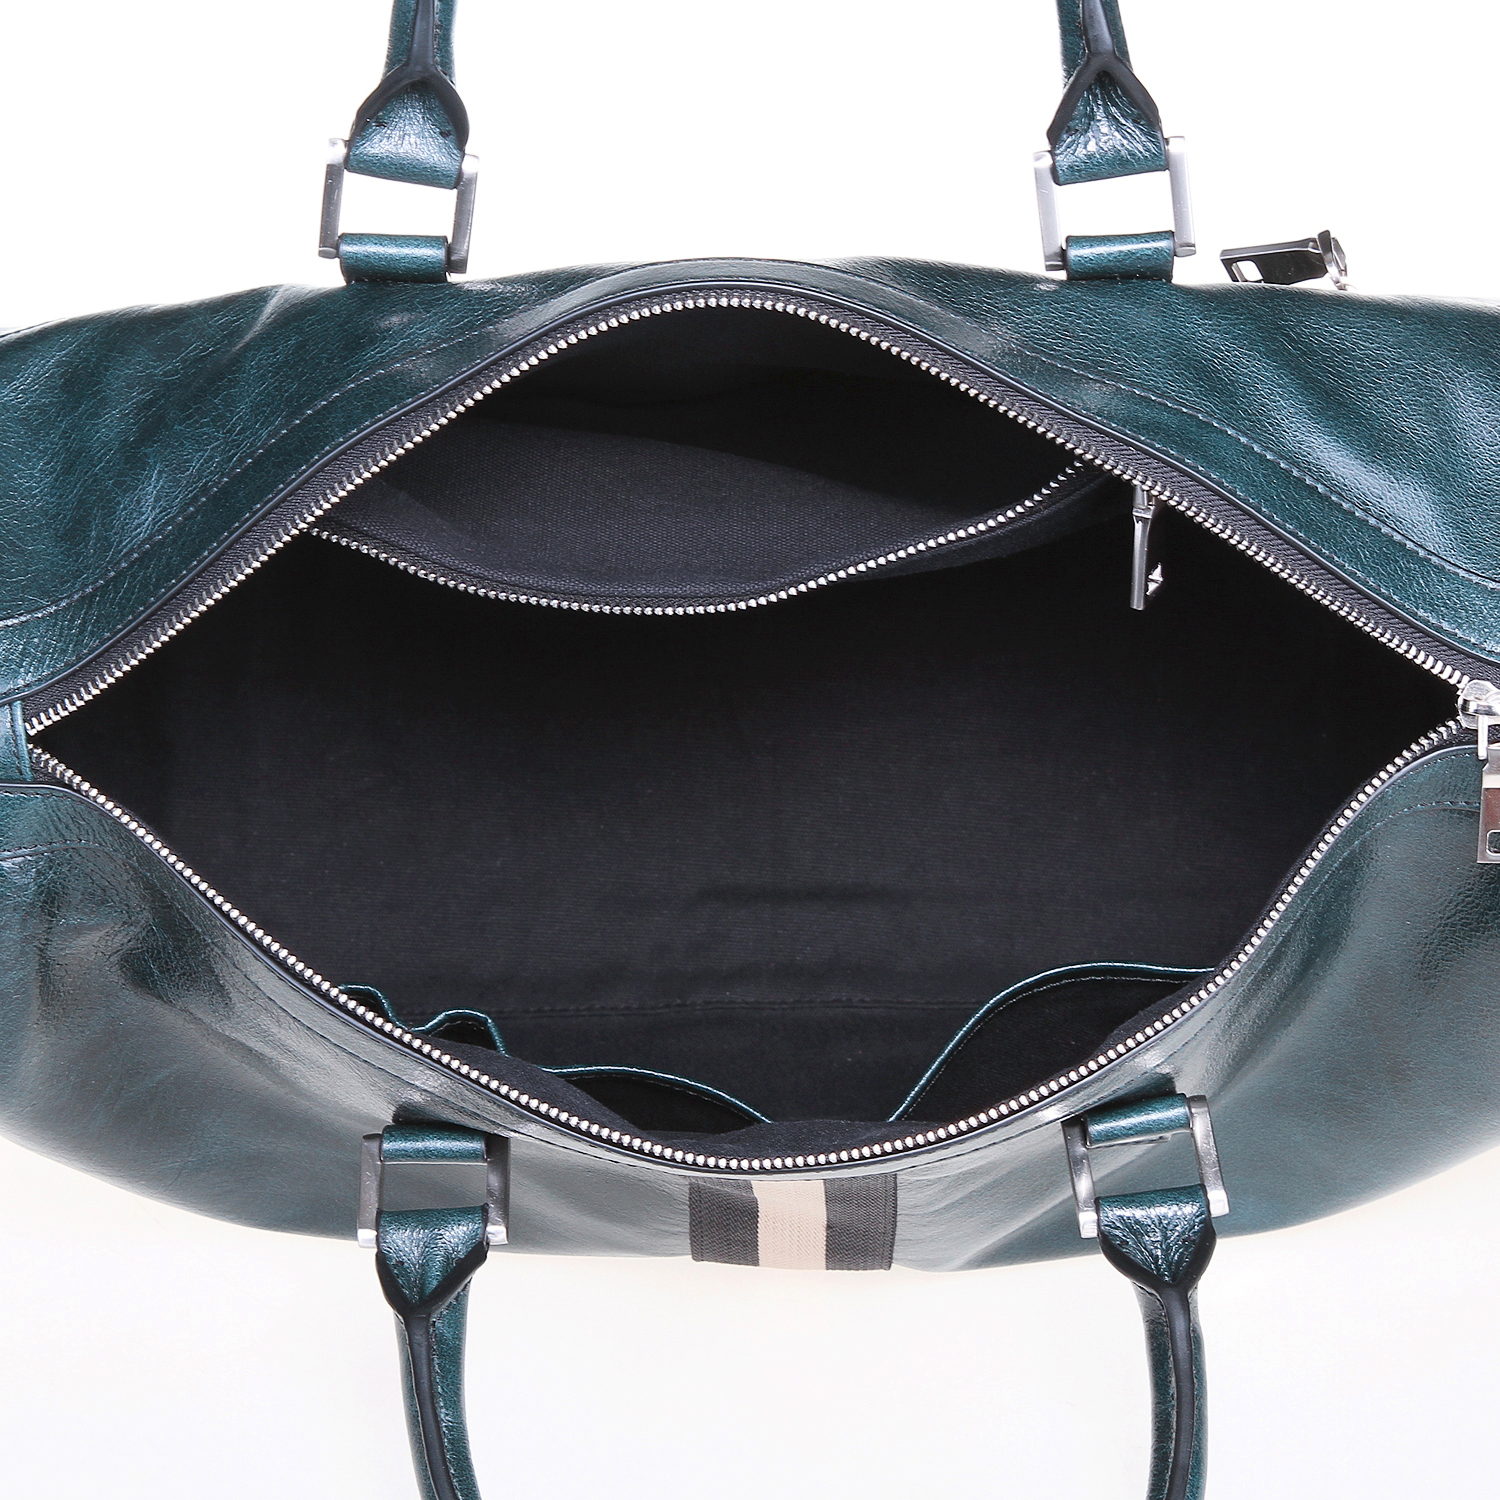 Dark green oil wax cowhide men’s travel bag with webbing on front